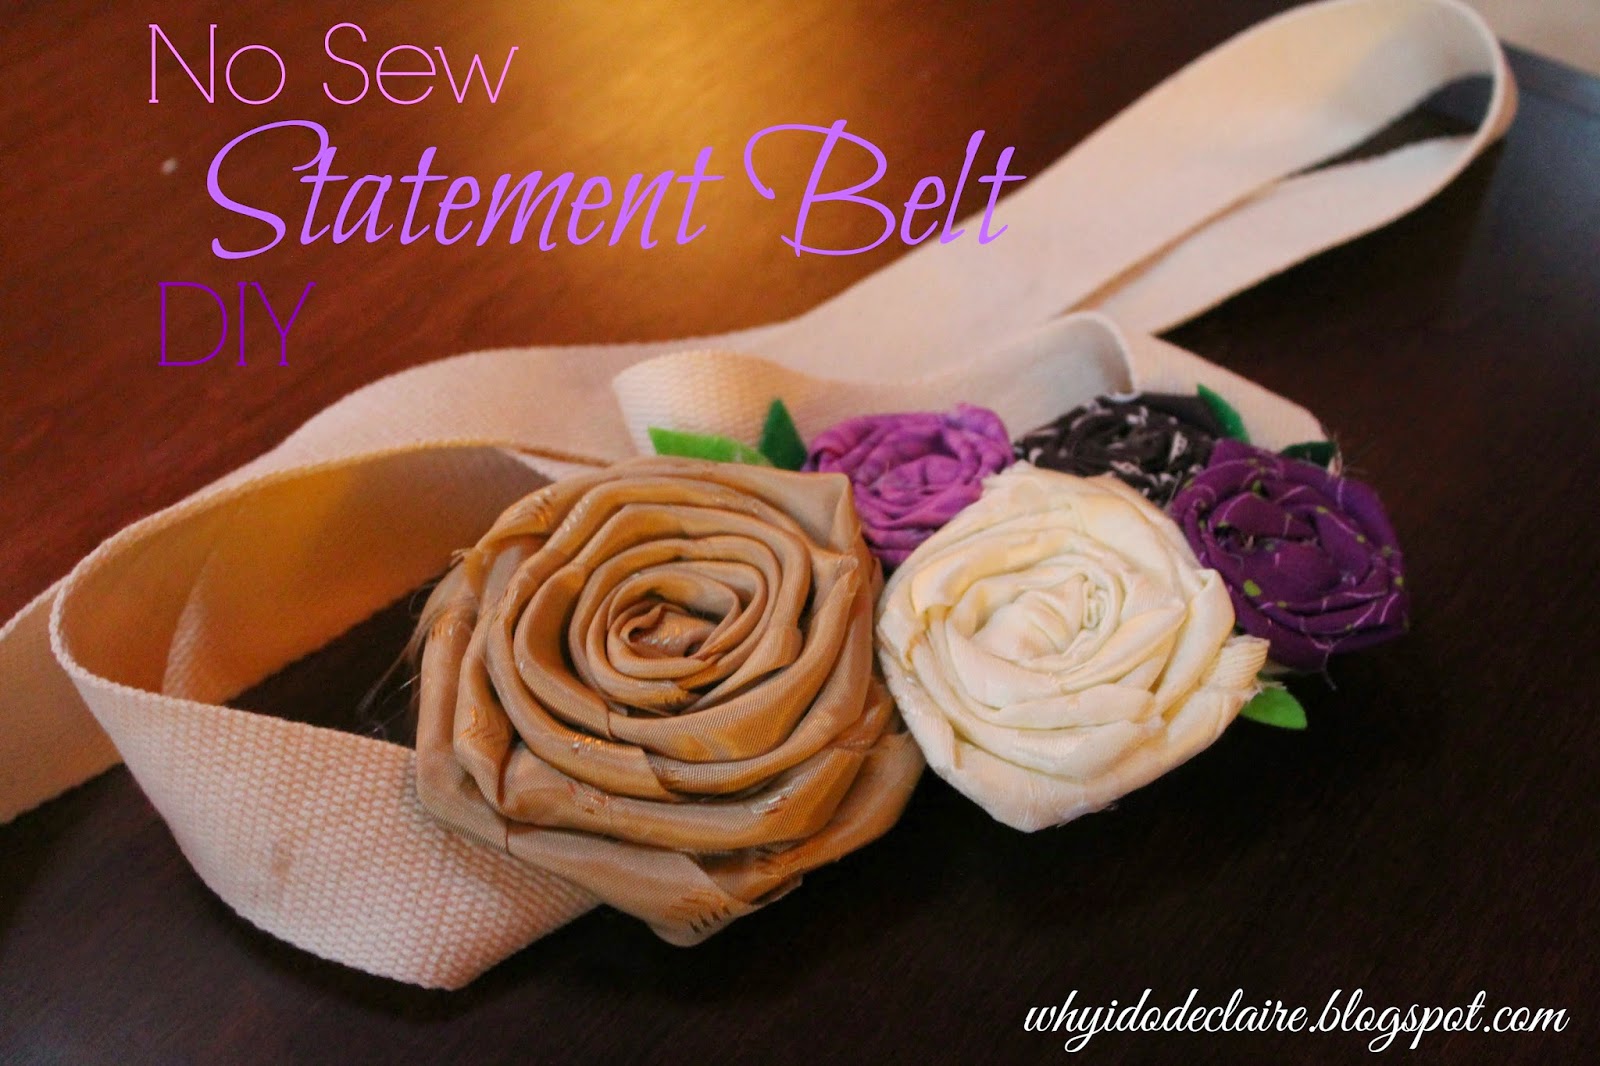 No Sew Statement Belt DIY and Giveaway!